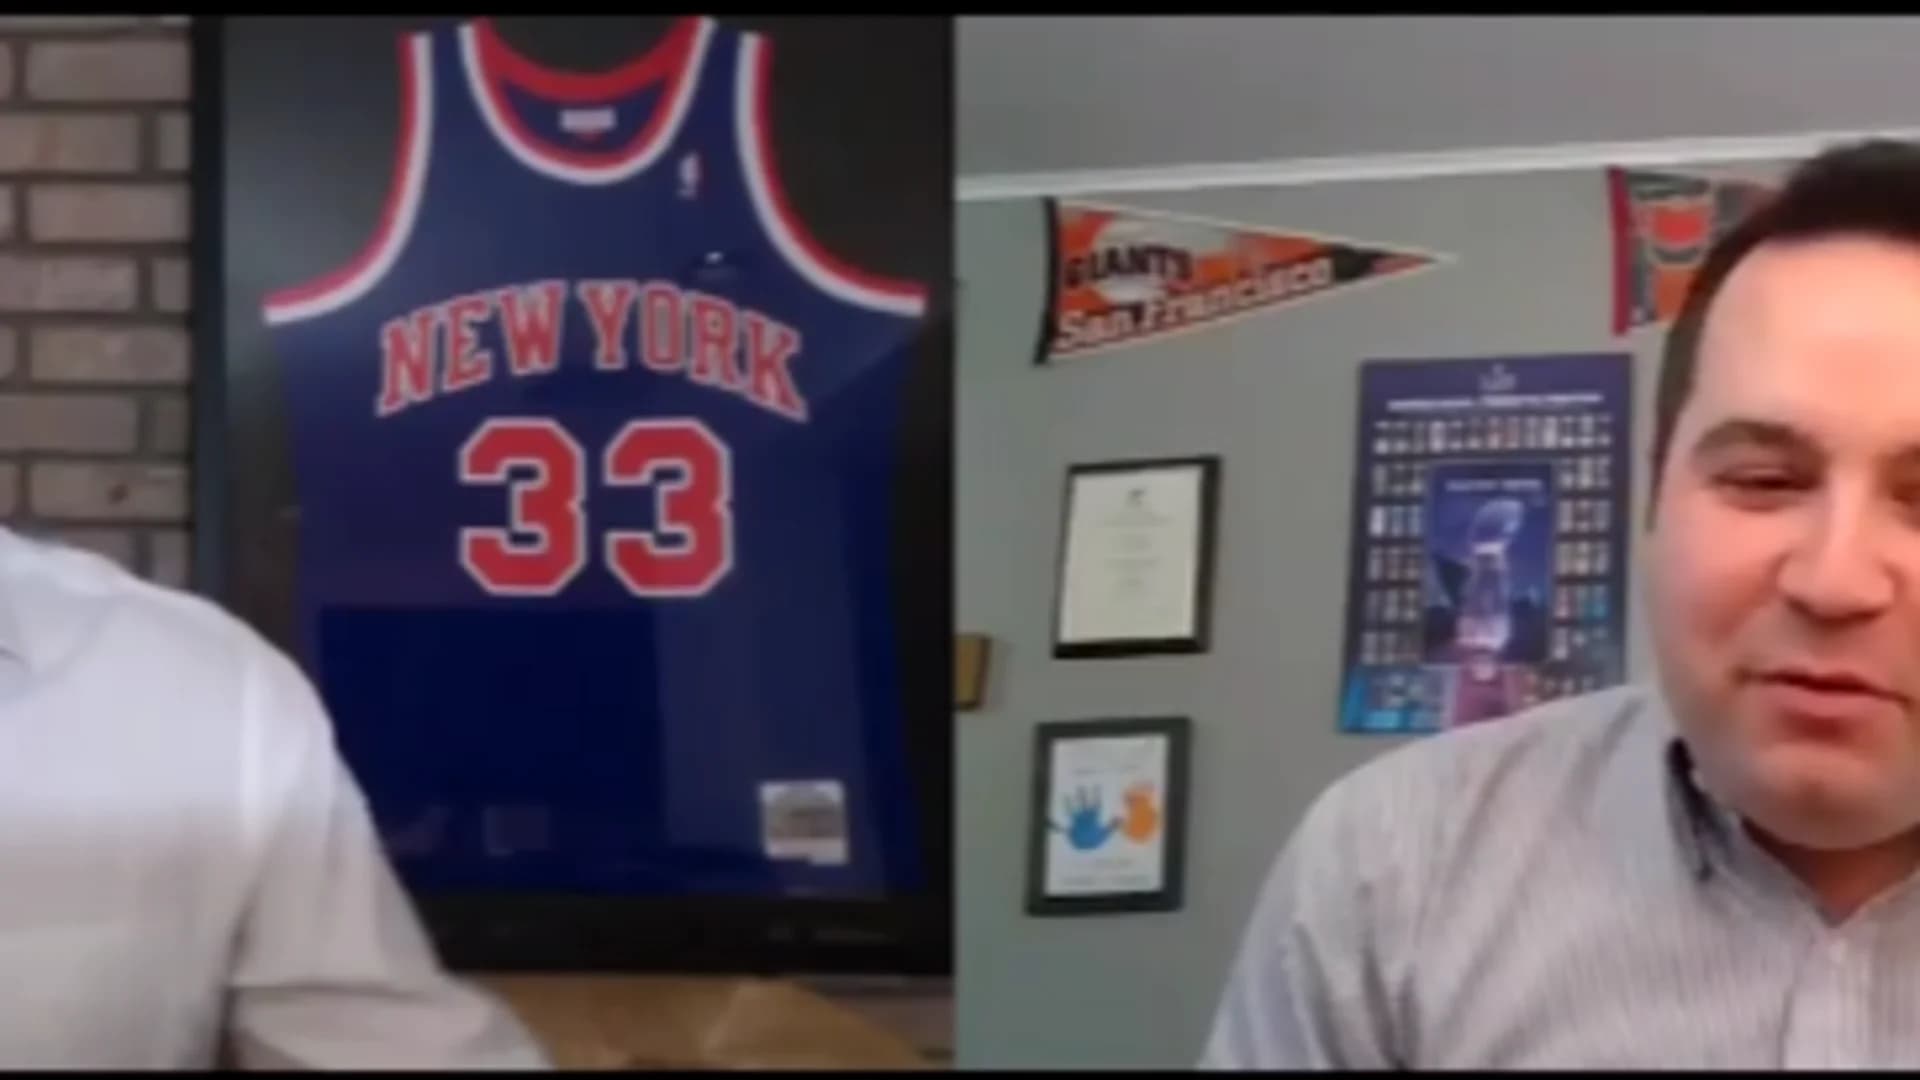 Top 4 figures in Knicks history: News 12’s Pat O’Keefe, Dan Serafin share their lists